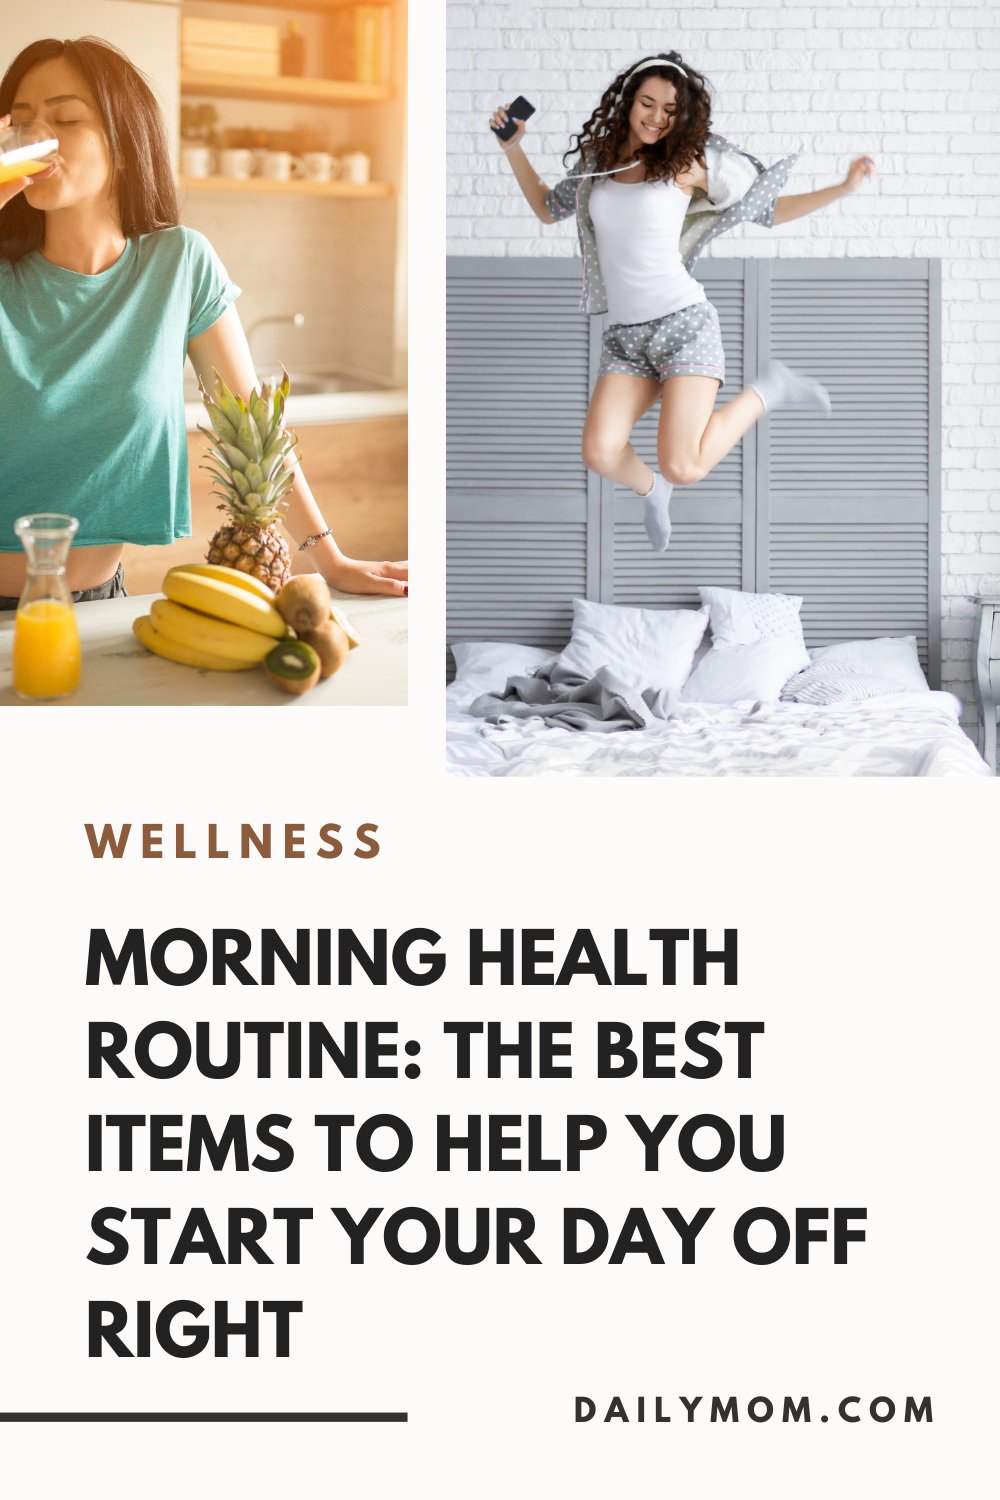 Morning Health Routine: 25 Of The Best Items To Help You Start Your Day Off Right 20 Daily Mom, Magazine For Families